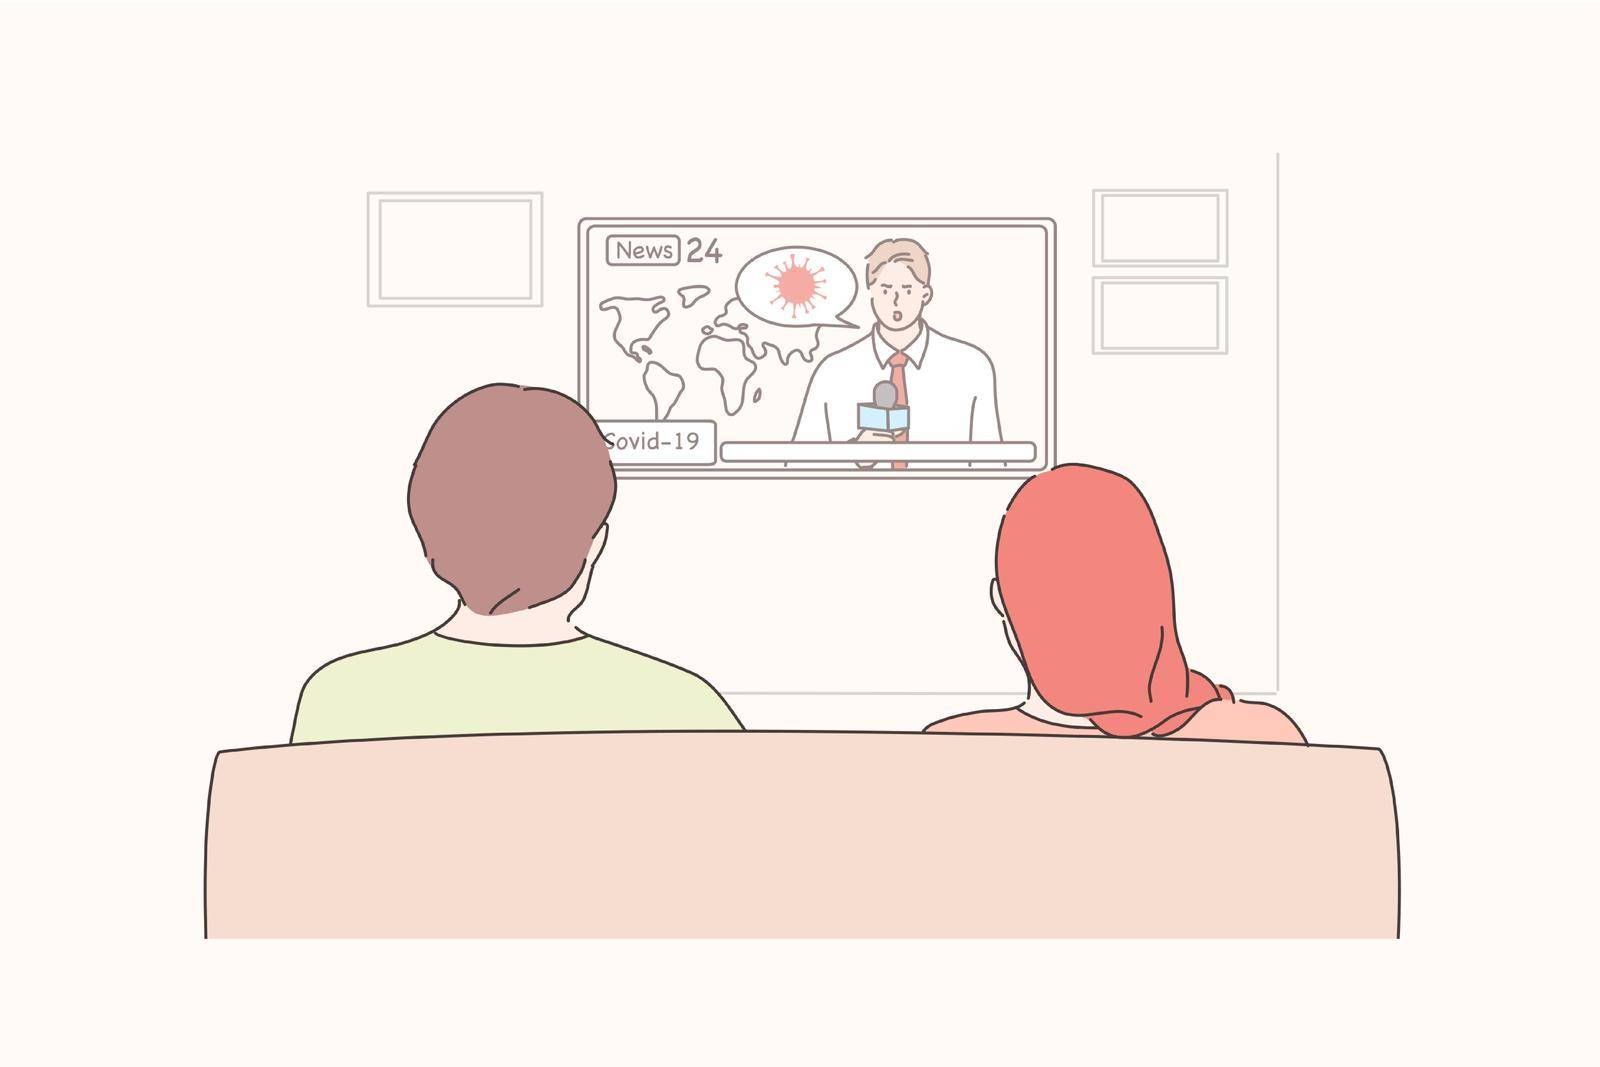 News, quarantine, coronavirus, broadcast concept. Young man and woman couple watching news on TV or reminder to stay at home. Social distancing and self isolation during covid19 pandemic and lockdown.